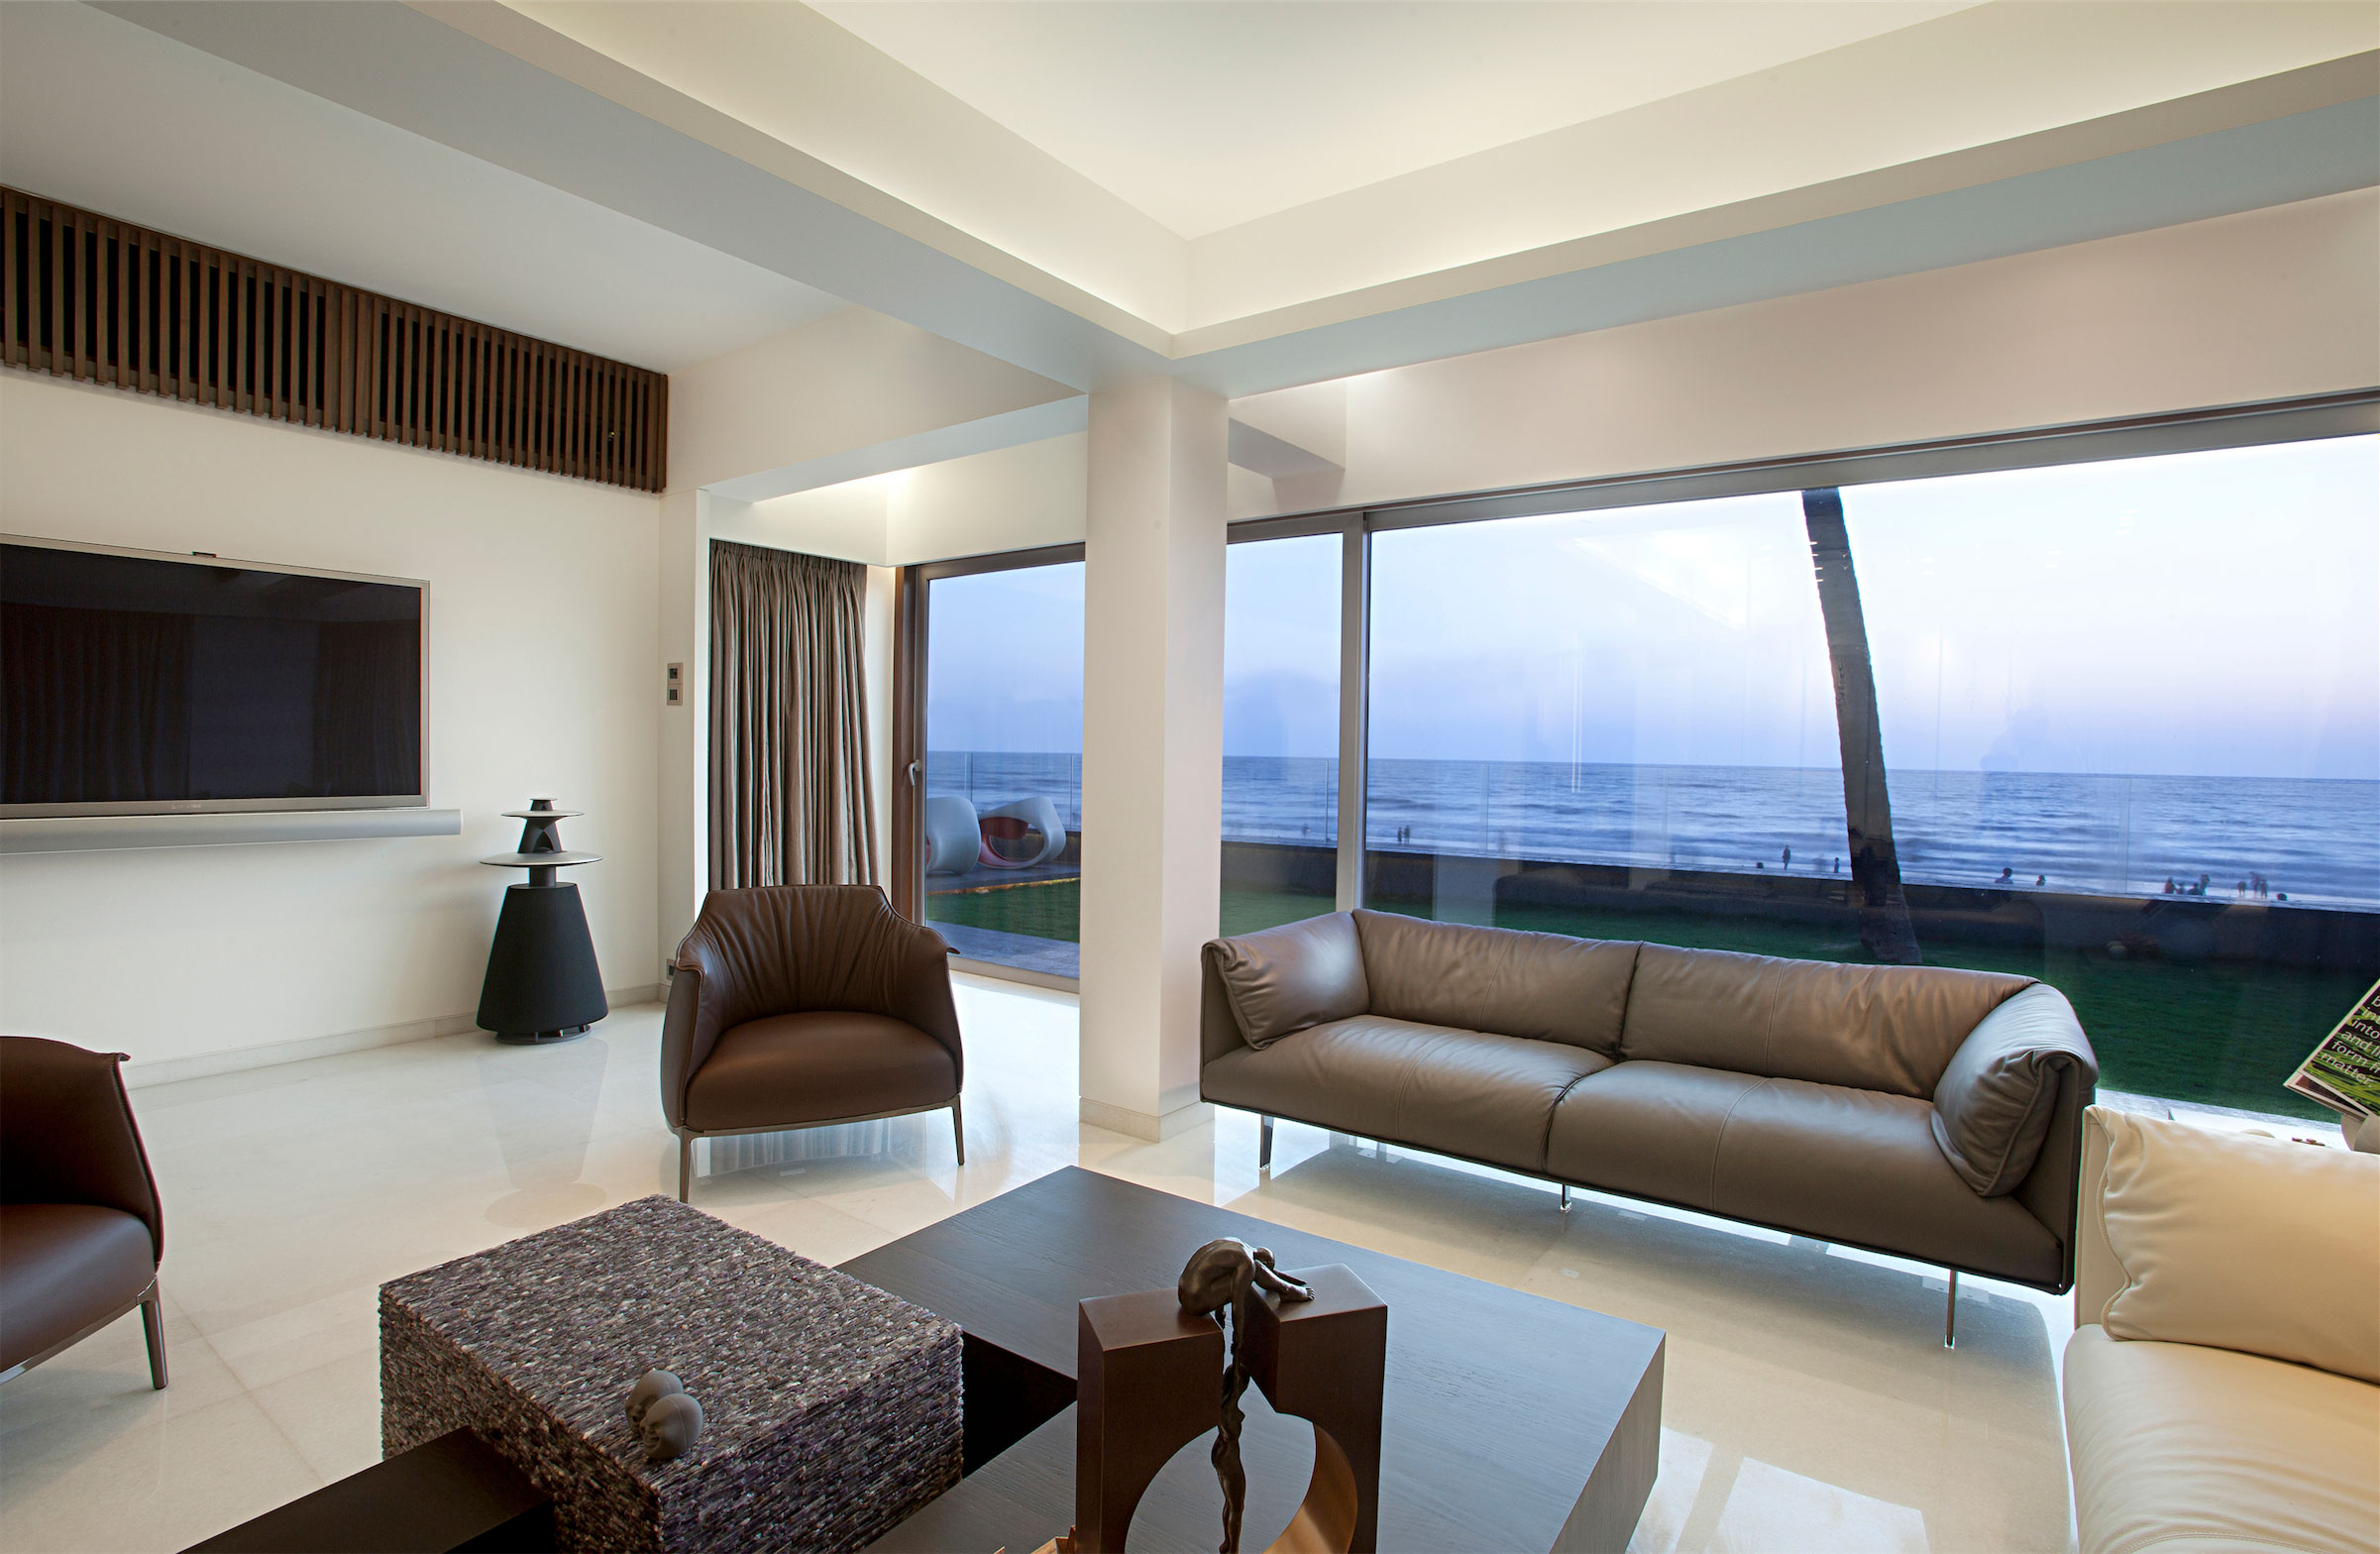 Living Room Design Open Living Room Beach Apartment Design With Brown Leather Sofa And Chairs Plus Glass Window With Curtains And Wall Mounted TV Ideas Apartment Stylish Beach Apartment With Stunning Terrace And Ocean View